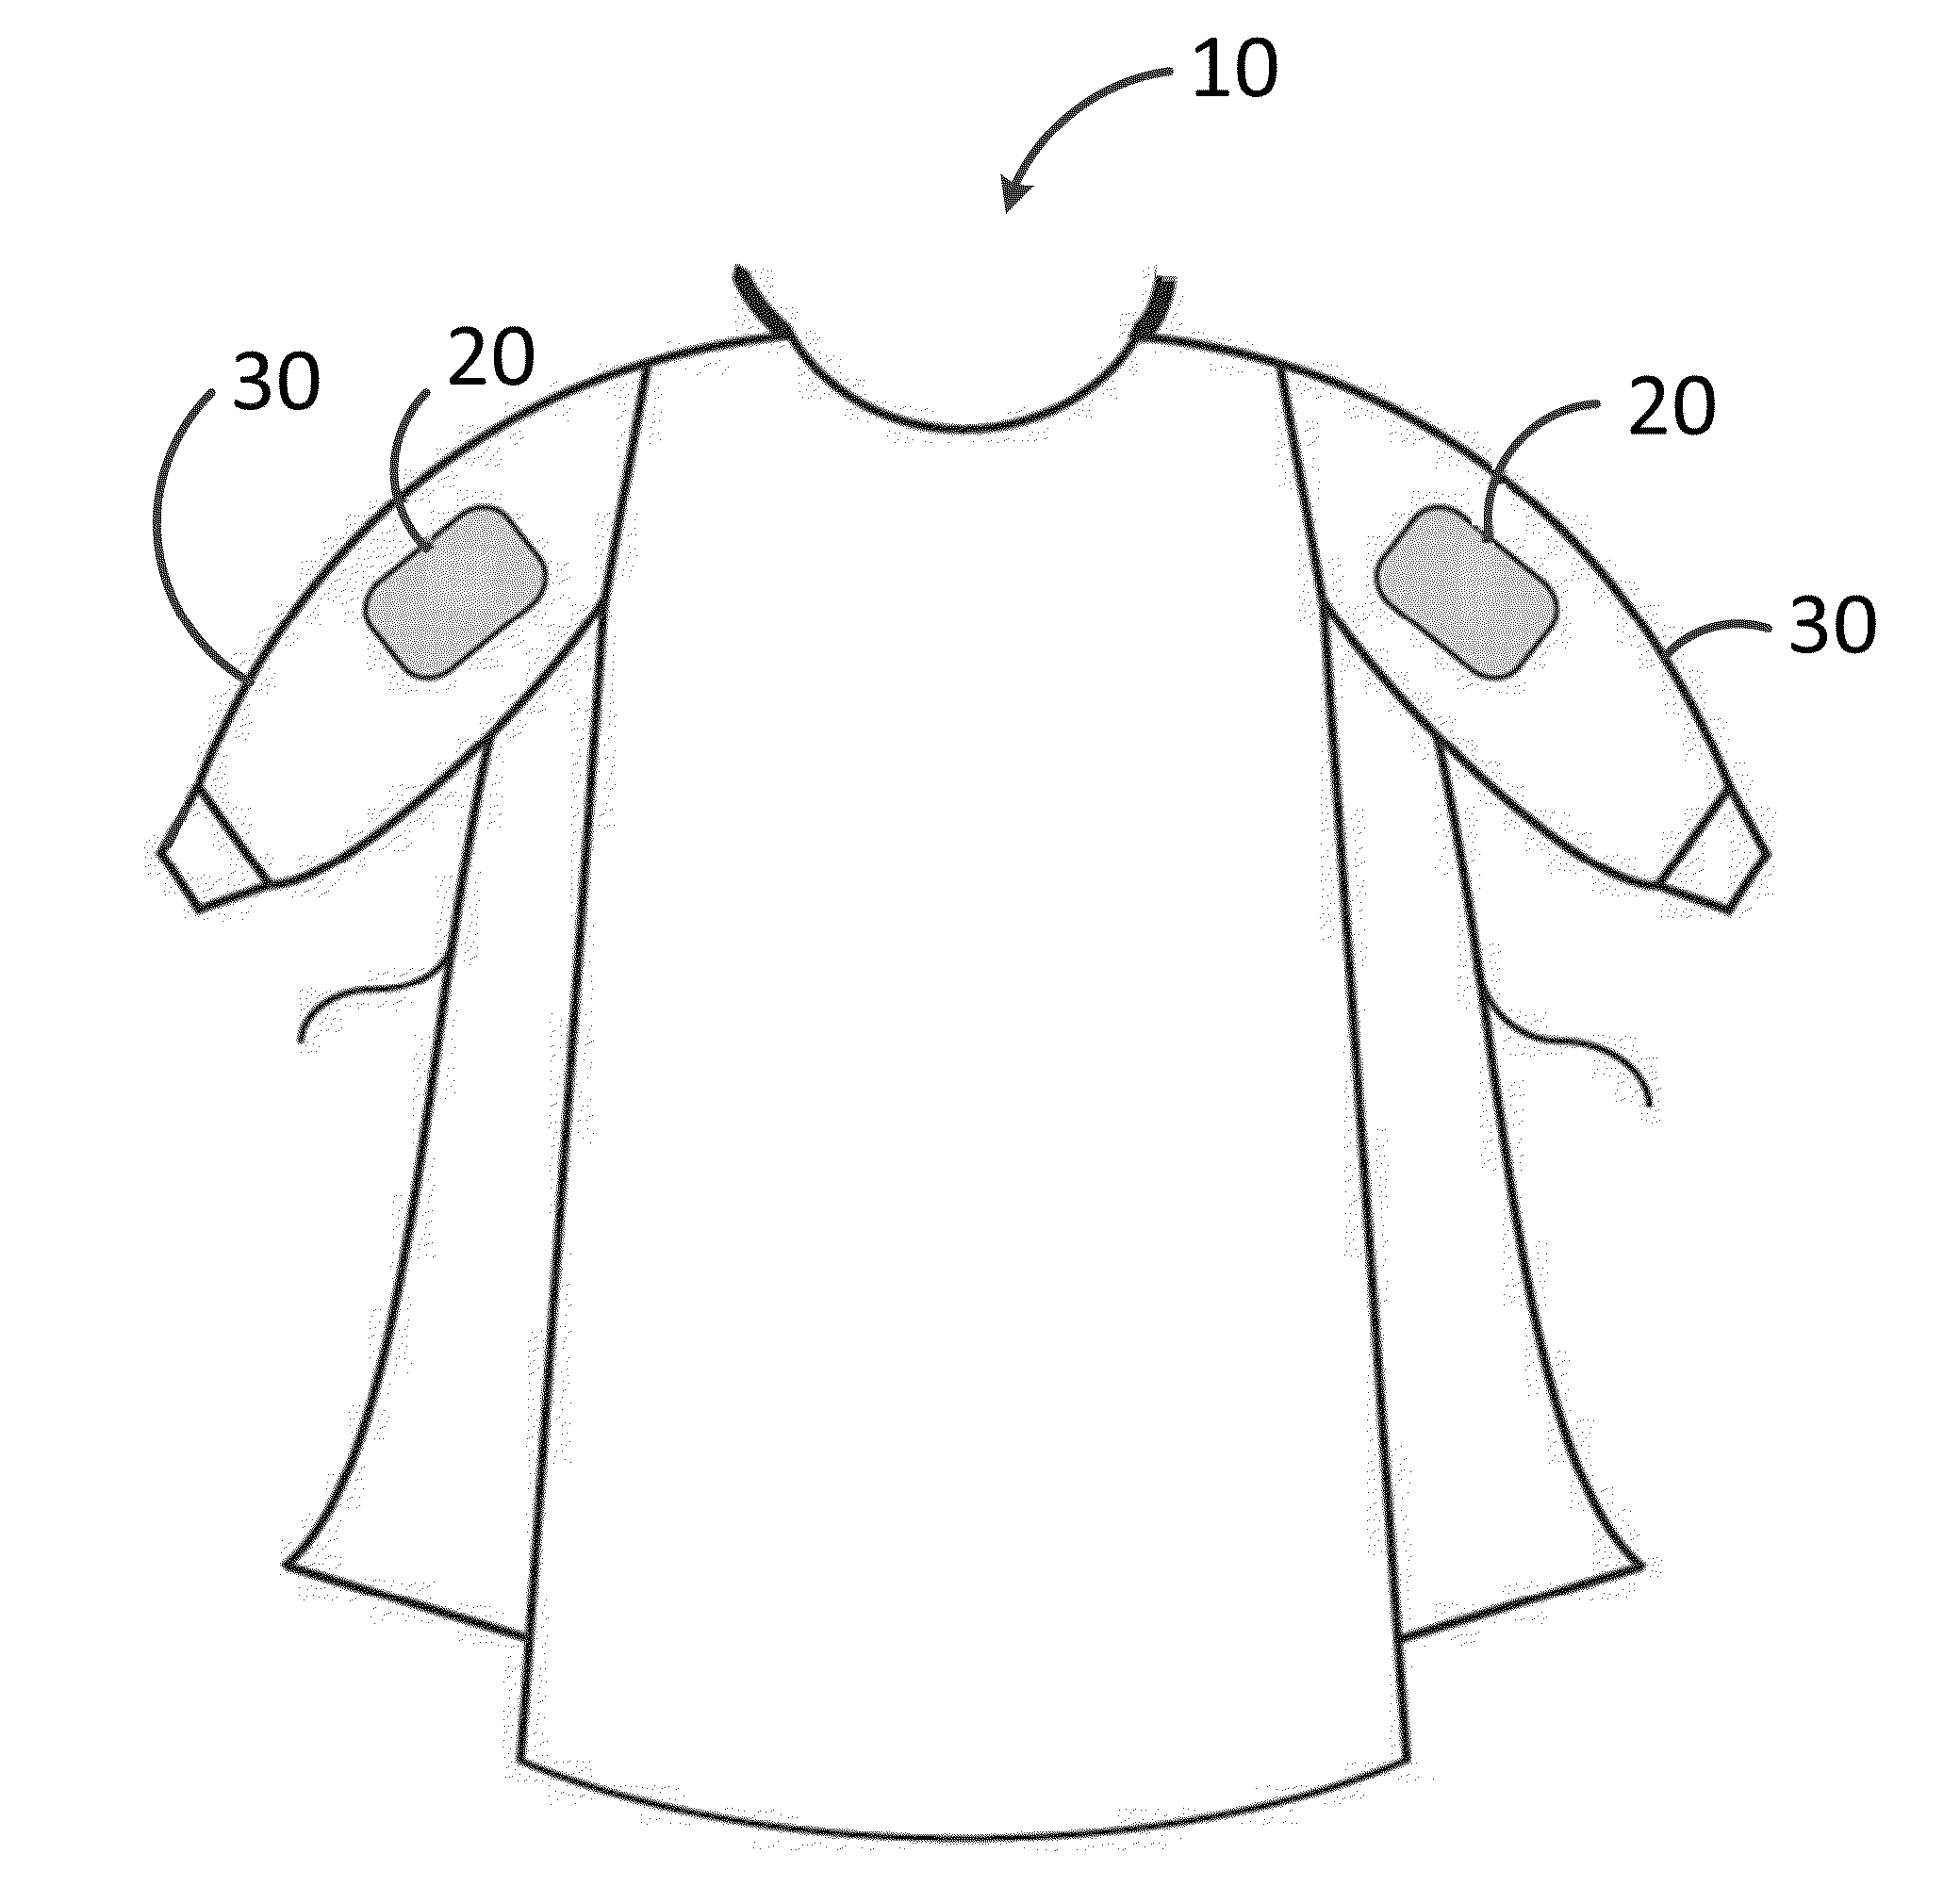 Surgical gown with functional window